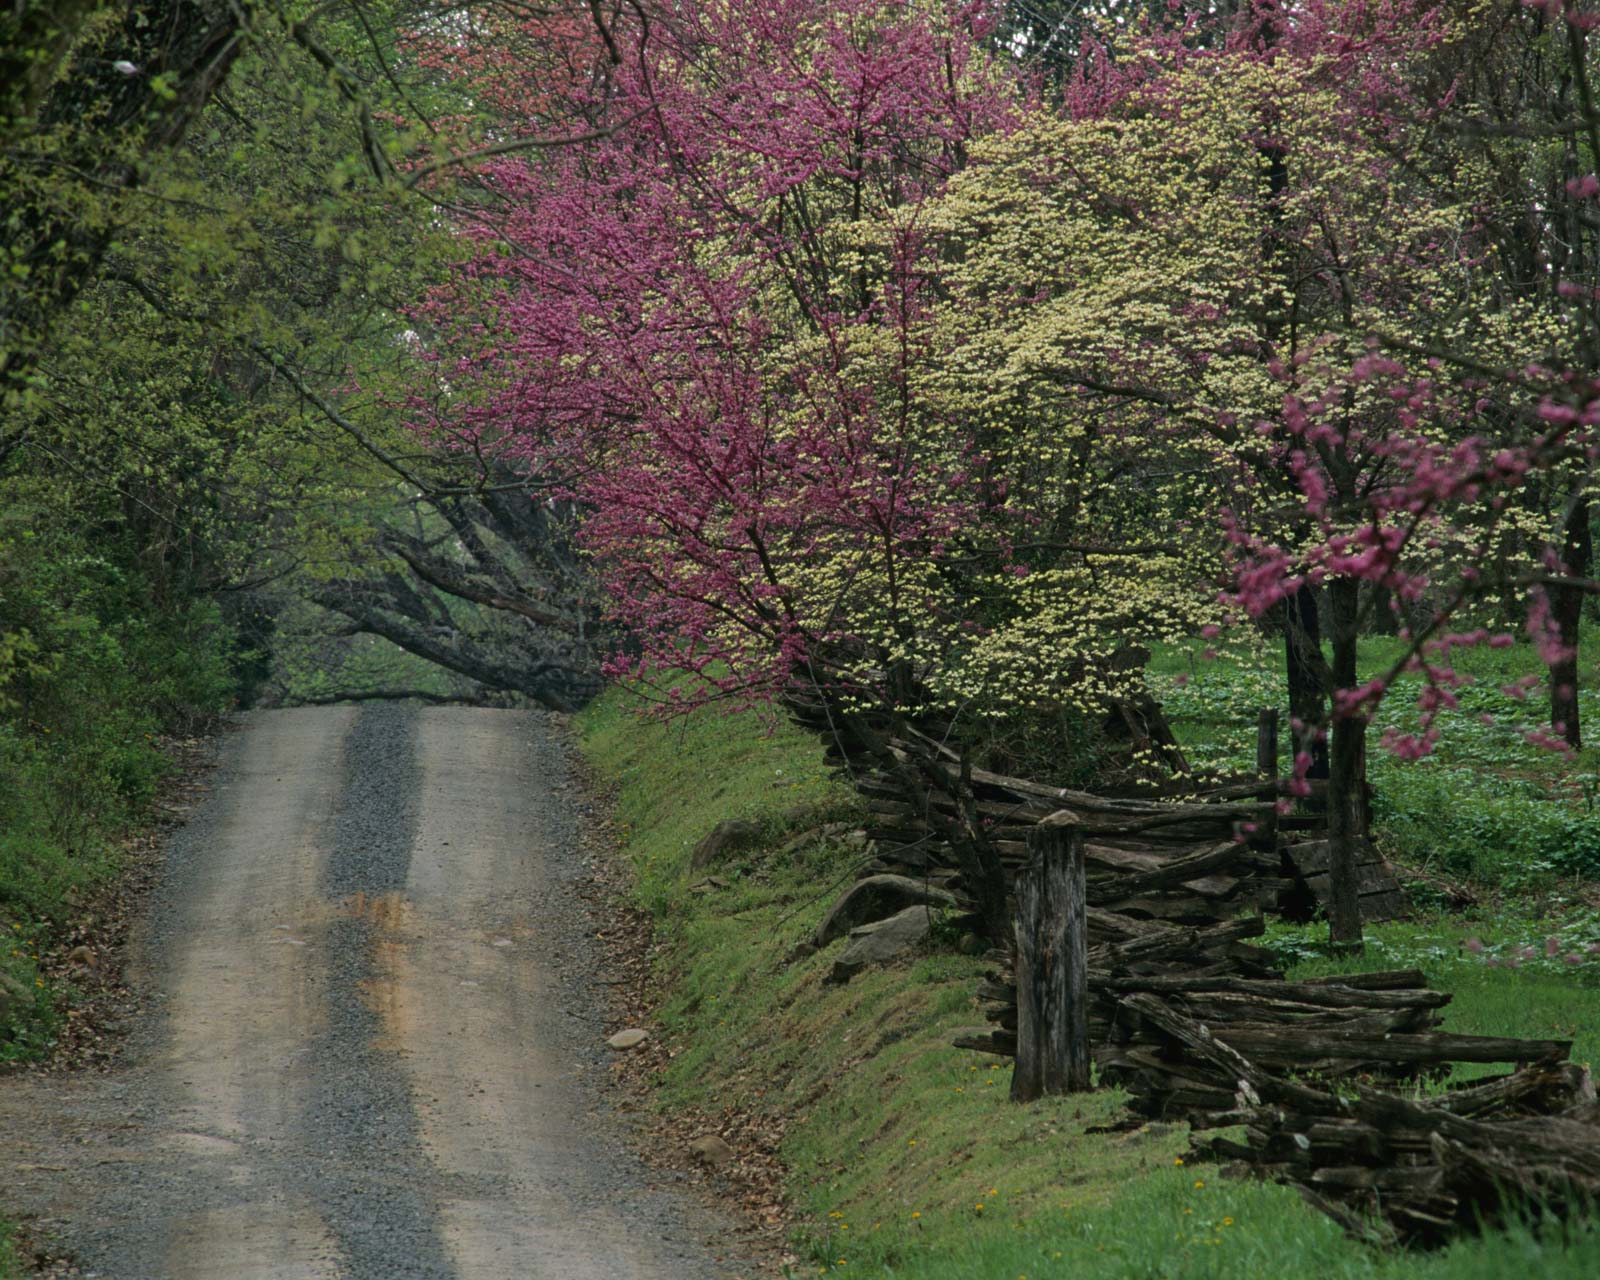 dirt road lined with a wooden fence and trees with purple flowers